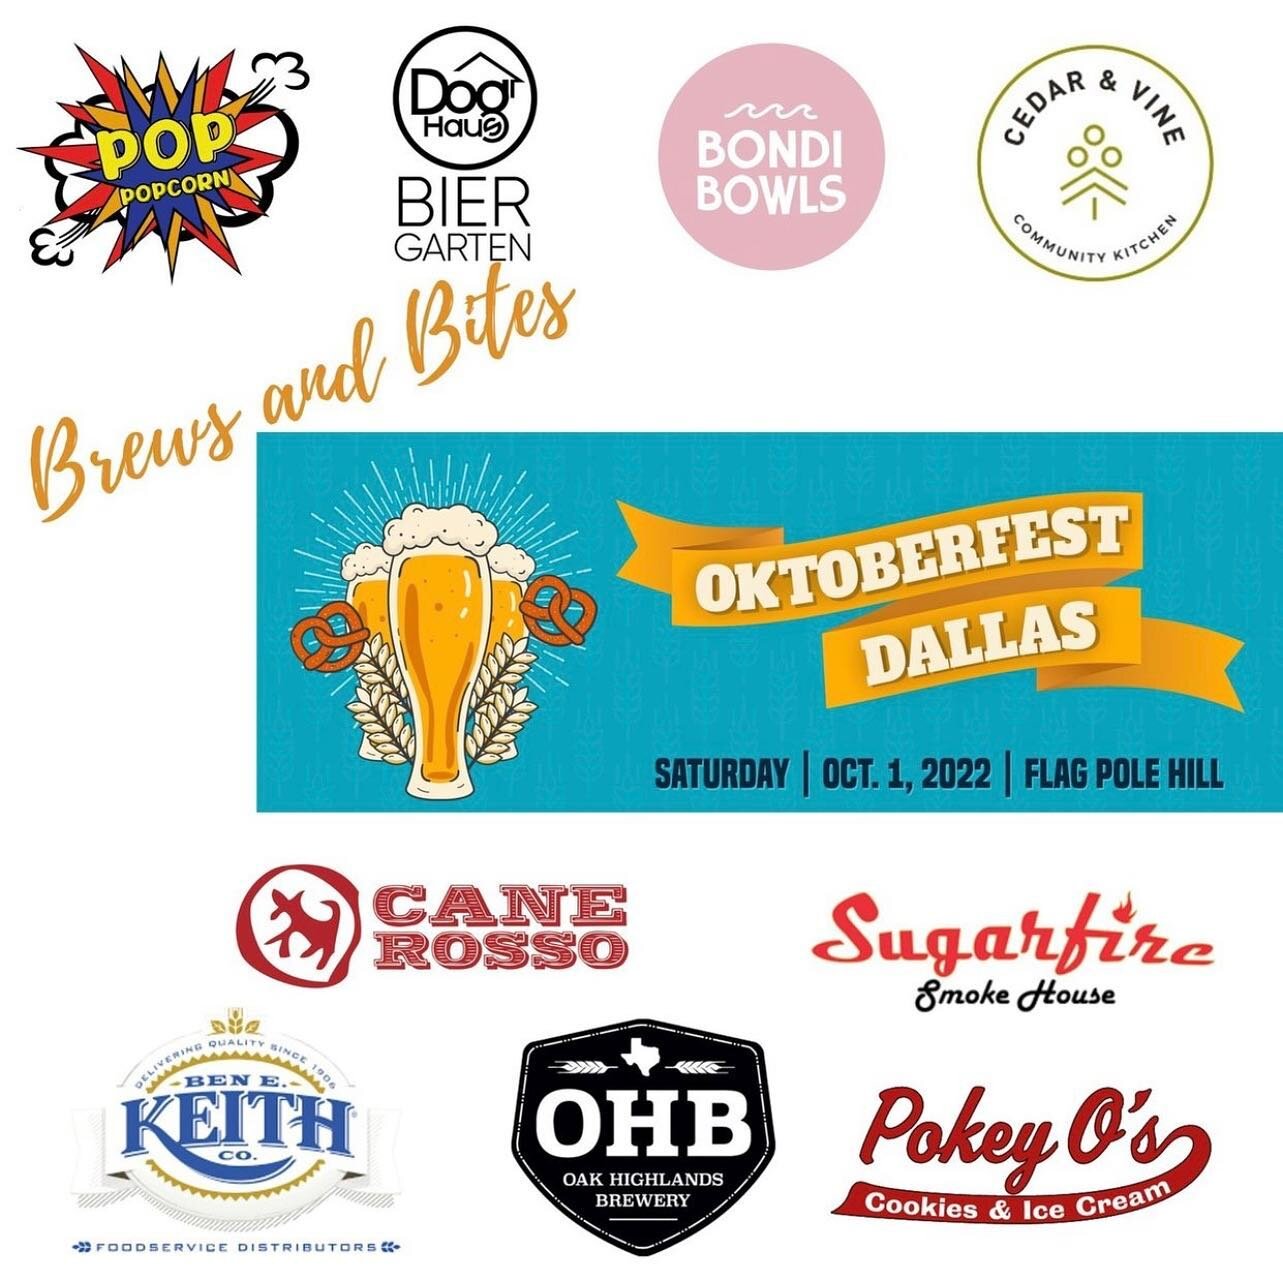 Catch us this year @oktoberfestdallas 
We will have Pretzels, Pork Schnitzel Sliders, Fried Brussels Sprouts and more! Don&rsquo;t miss out! 

#oktoberfest #oktoberfestdallas #pretzels #porkschitzel #lakehighlands #dallasfoodtrucks #lheats #dallasfoo